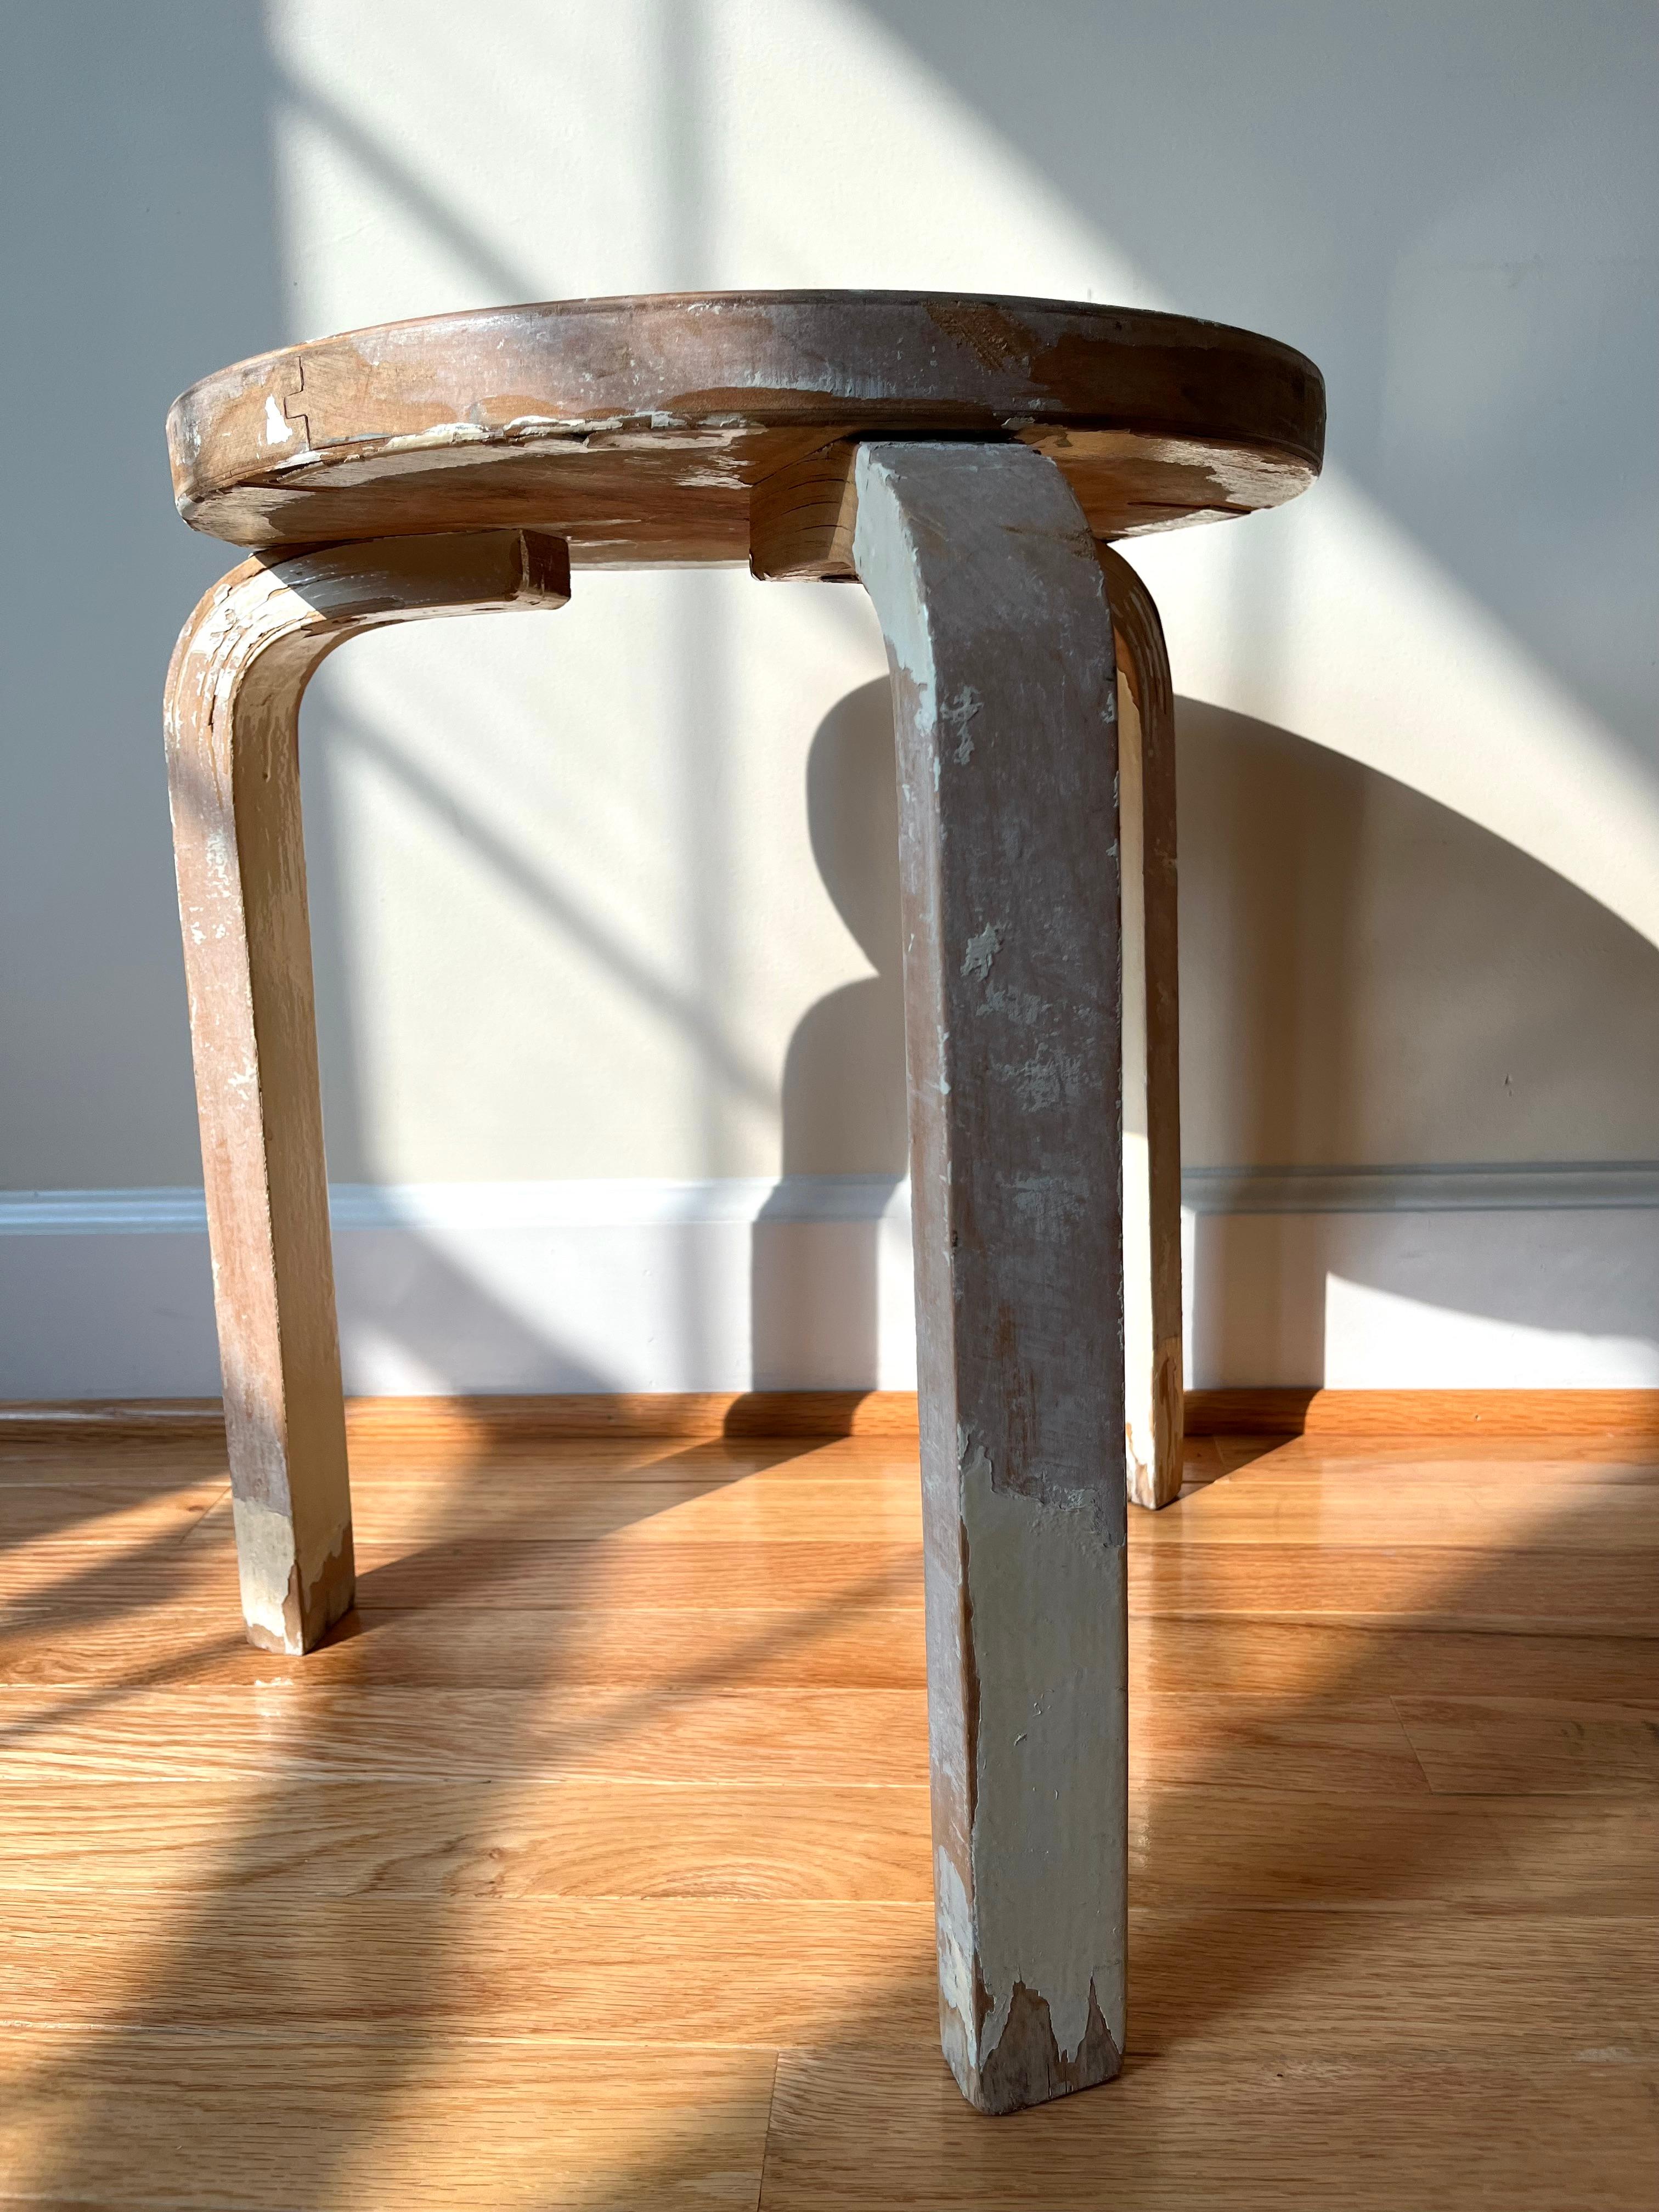 20th Century Stool 60 with finger joint seat by Alvar Aalto for Artek, 1950s For Sale